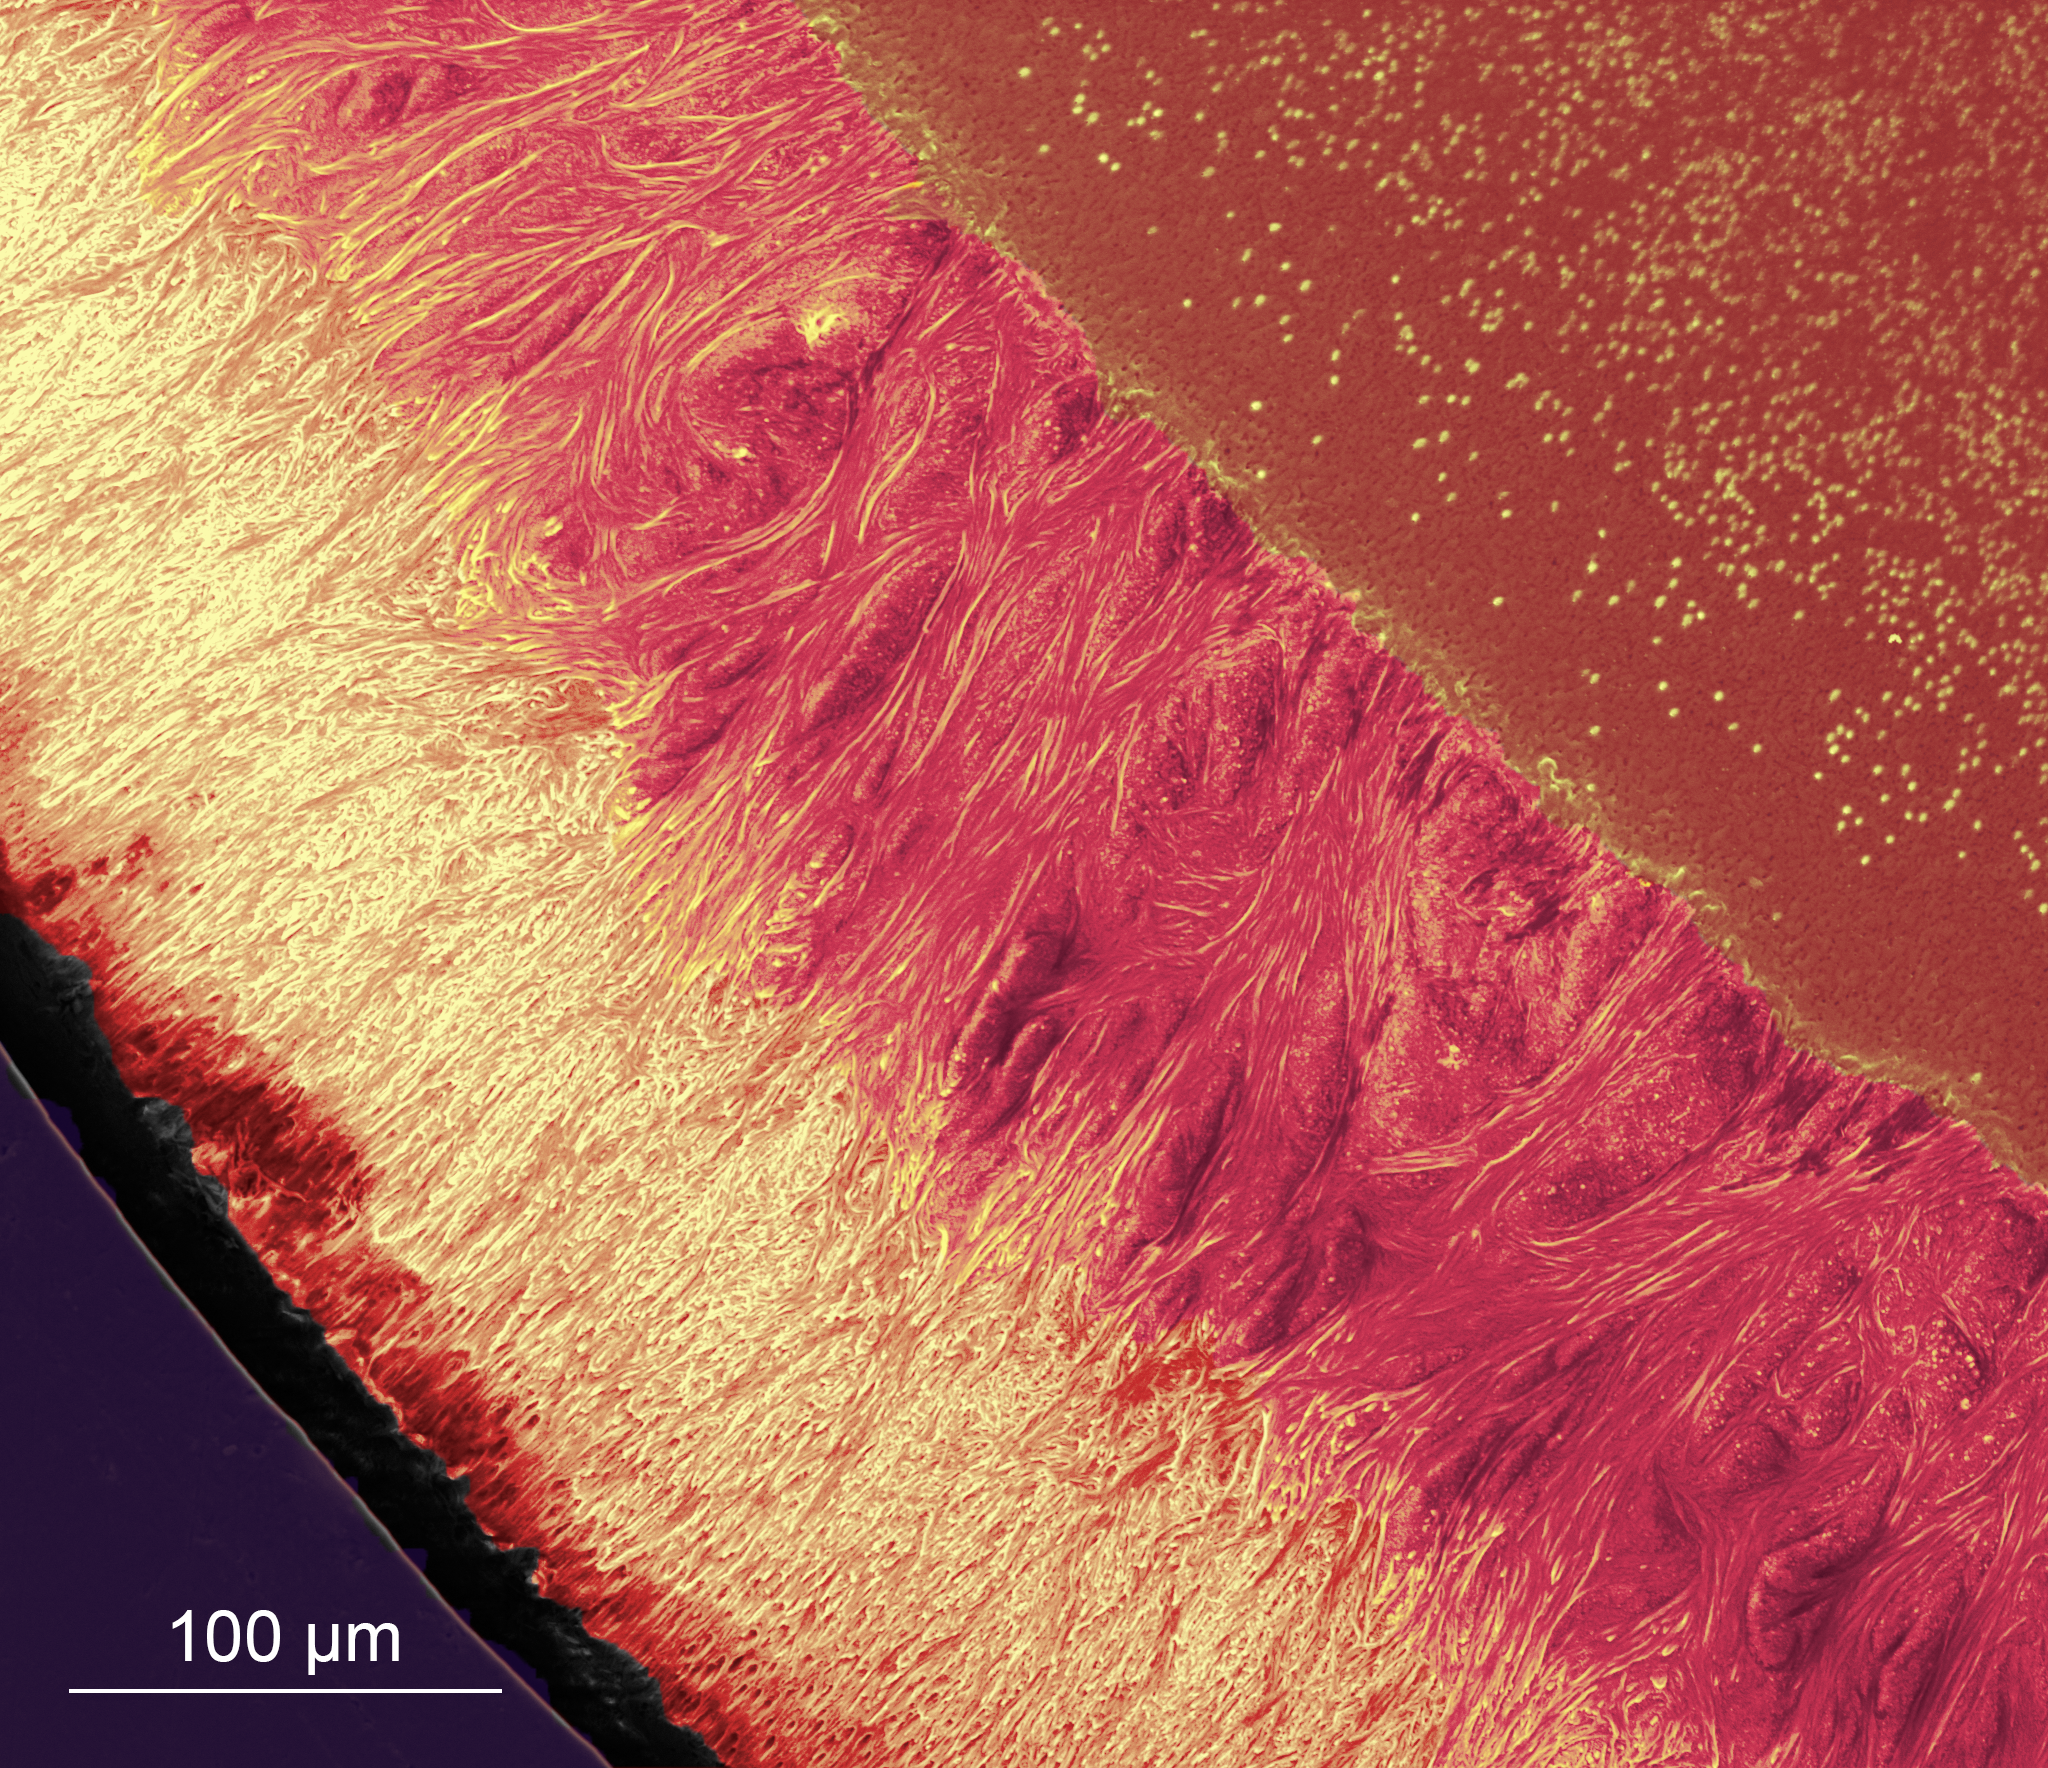 scanning electron microscopy image of a fish tooth cross-section